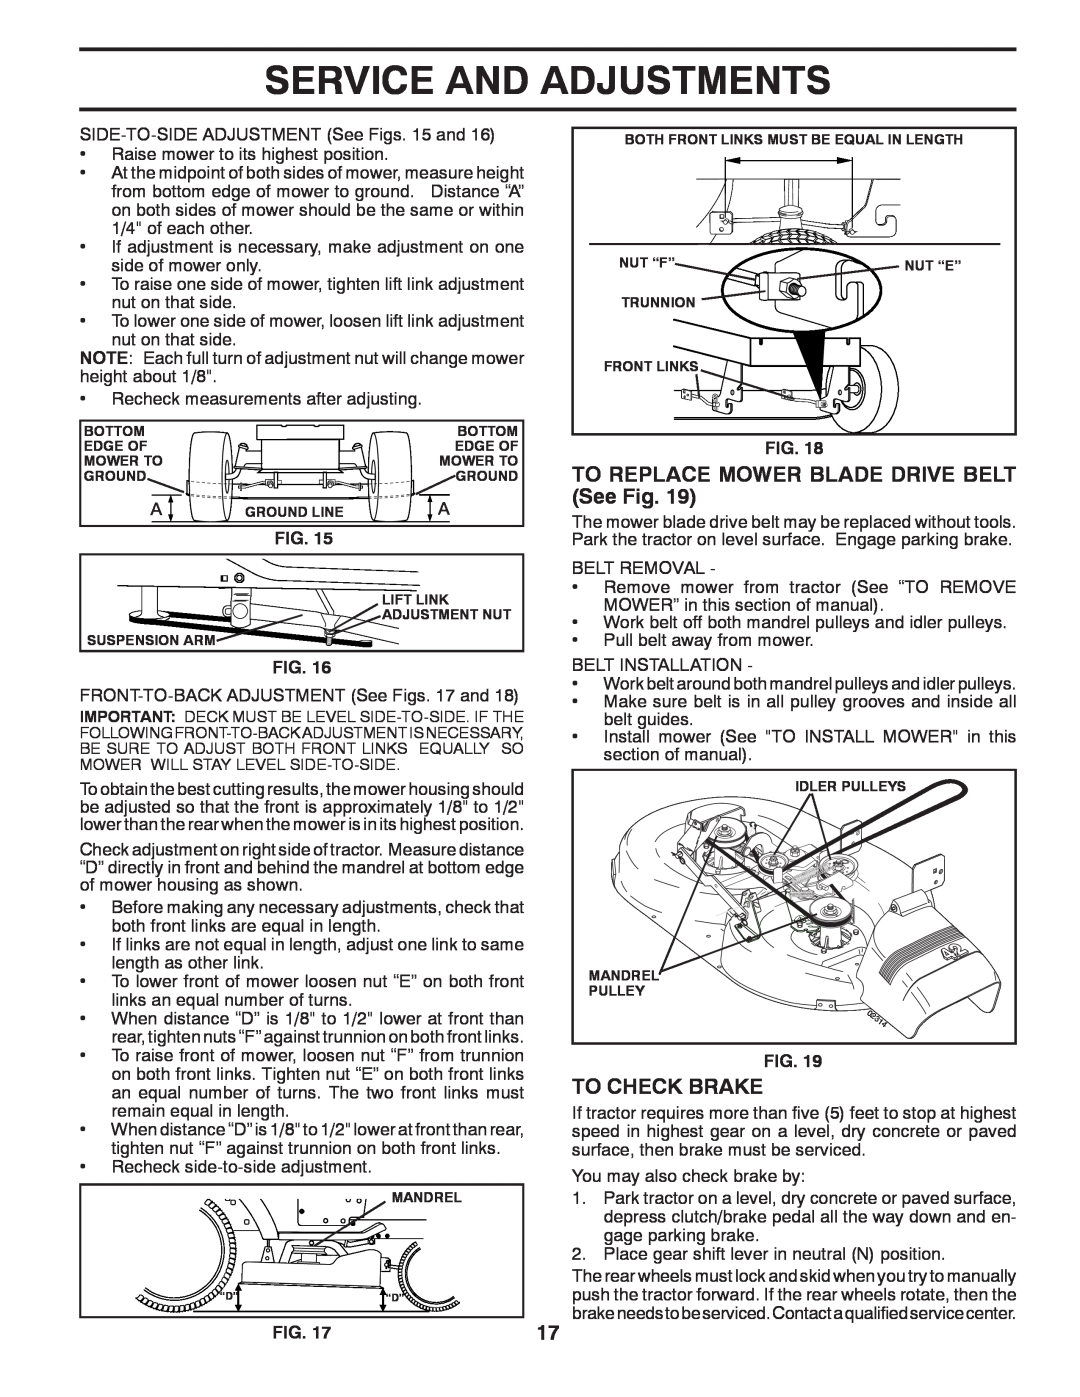 Poulan 424008 manual TO REPLACE MOWER BLADE DRIVE BELT See Fig, To Check Brake, Service And Adjustments 